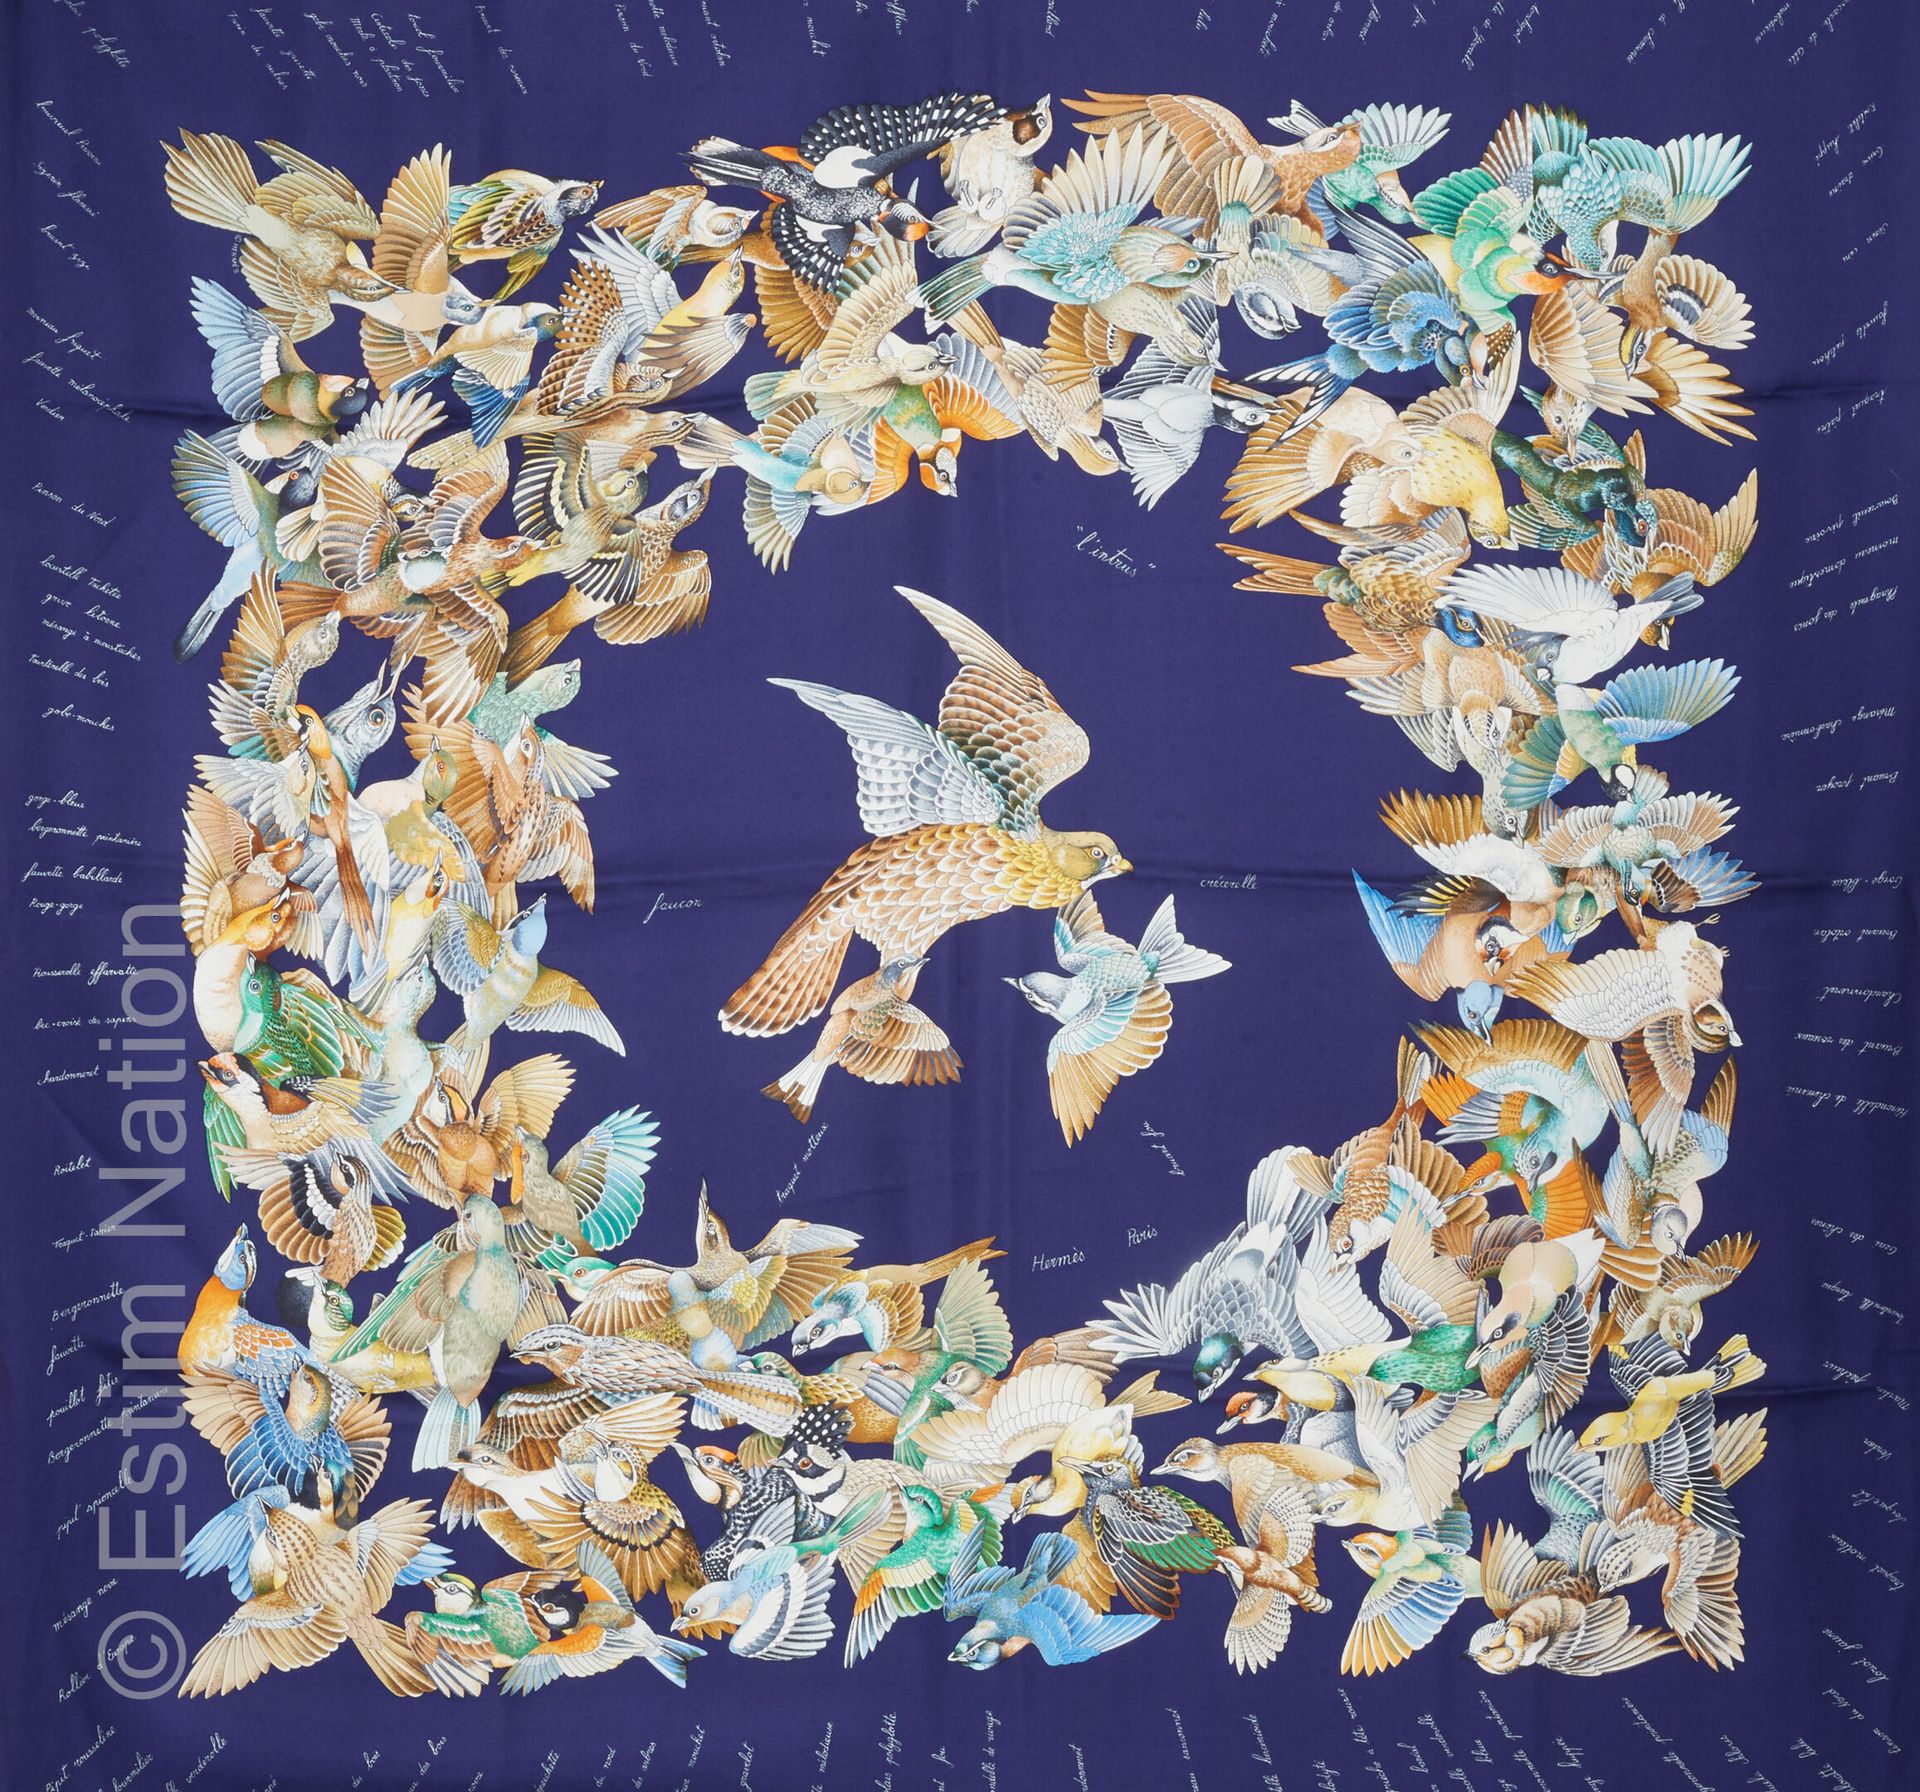 HERMES Paris SQUARE in printed silk twill titled "The intruder" with birds (in i&hellip;